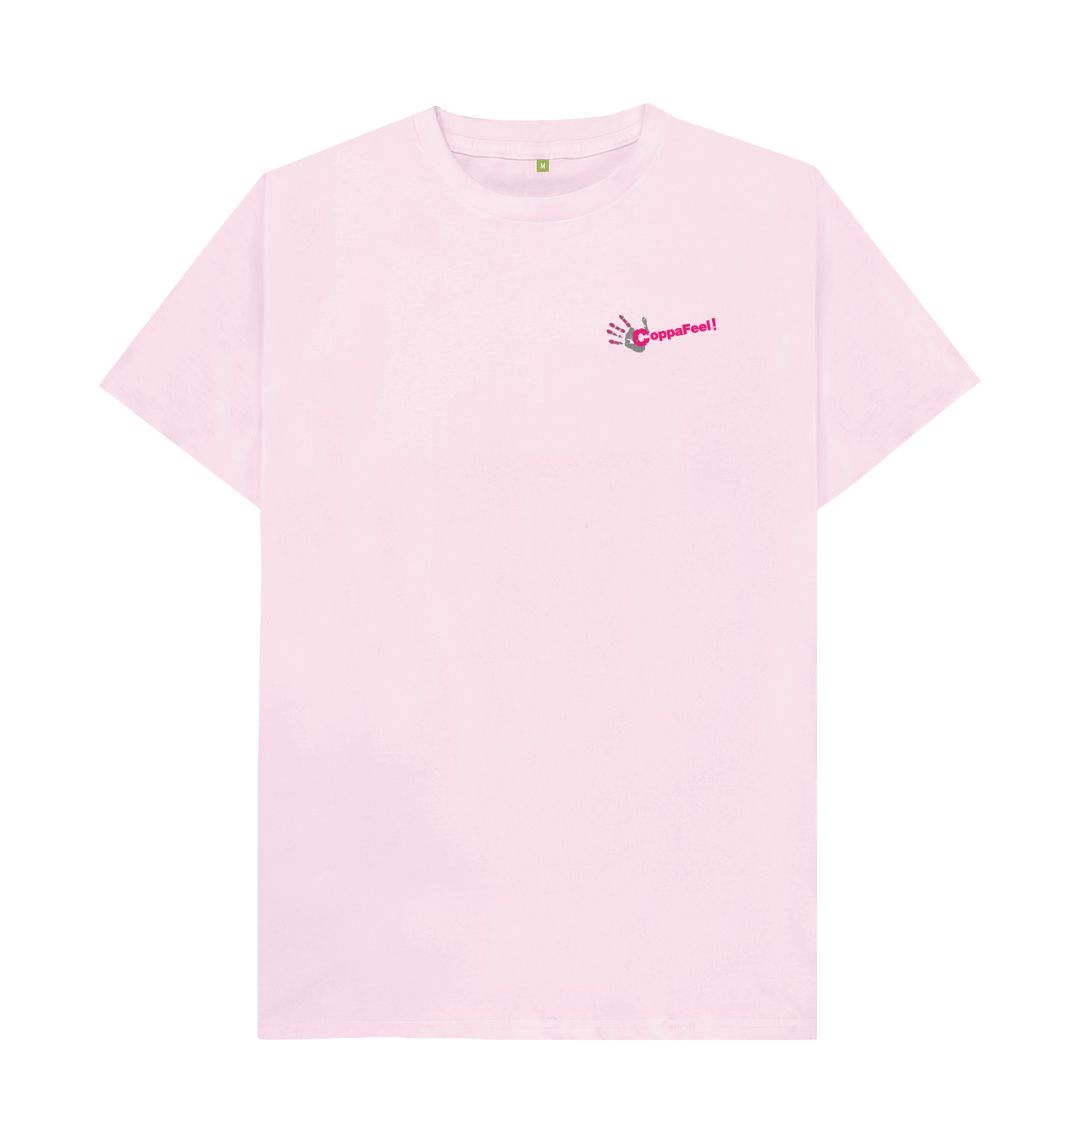 Pink Pale Pink Look, Feel, Touch Typography Short Sleeve T-Shirt